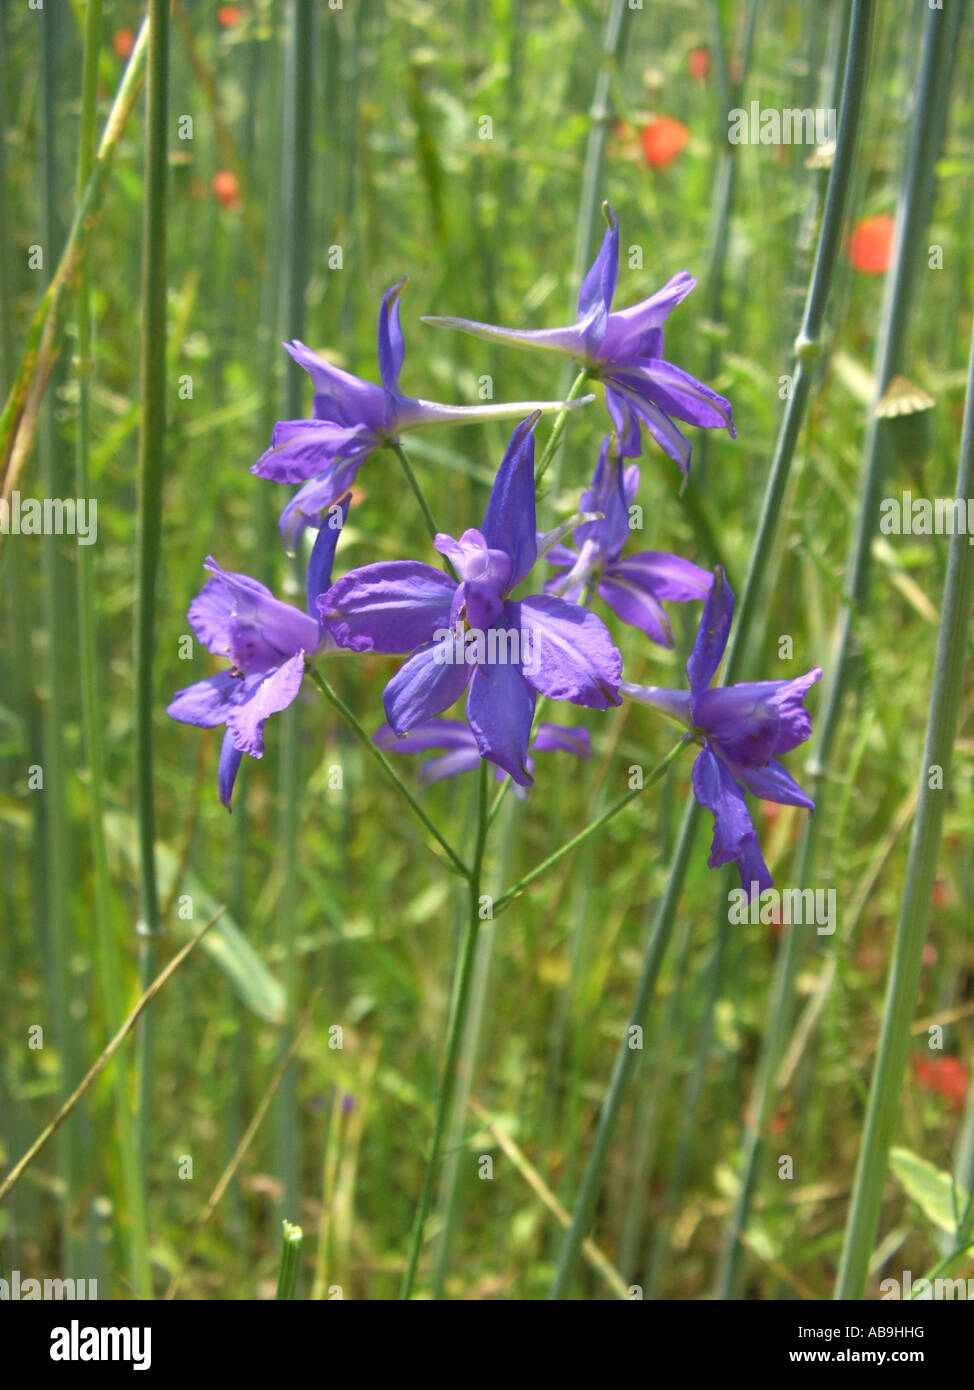 forking larkspur, field larkspur (Consolida regalis, Delphinium consolida), blooming in corn field, Germany, Hesse Stock Photo